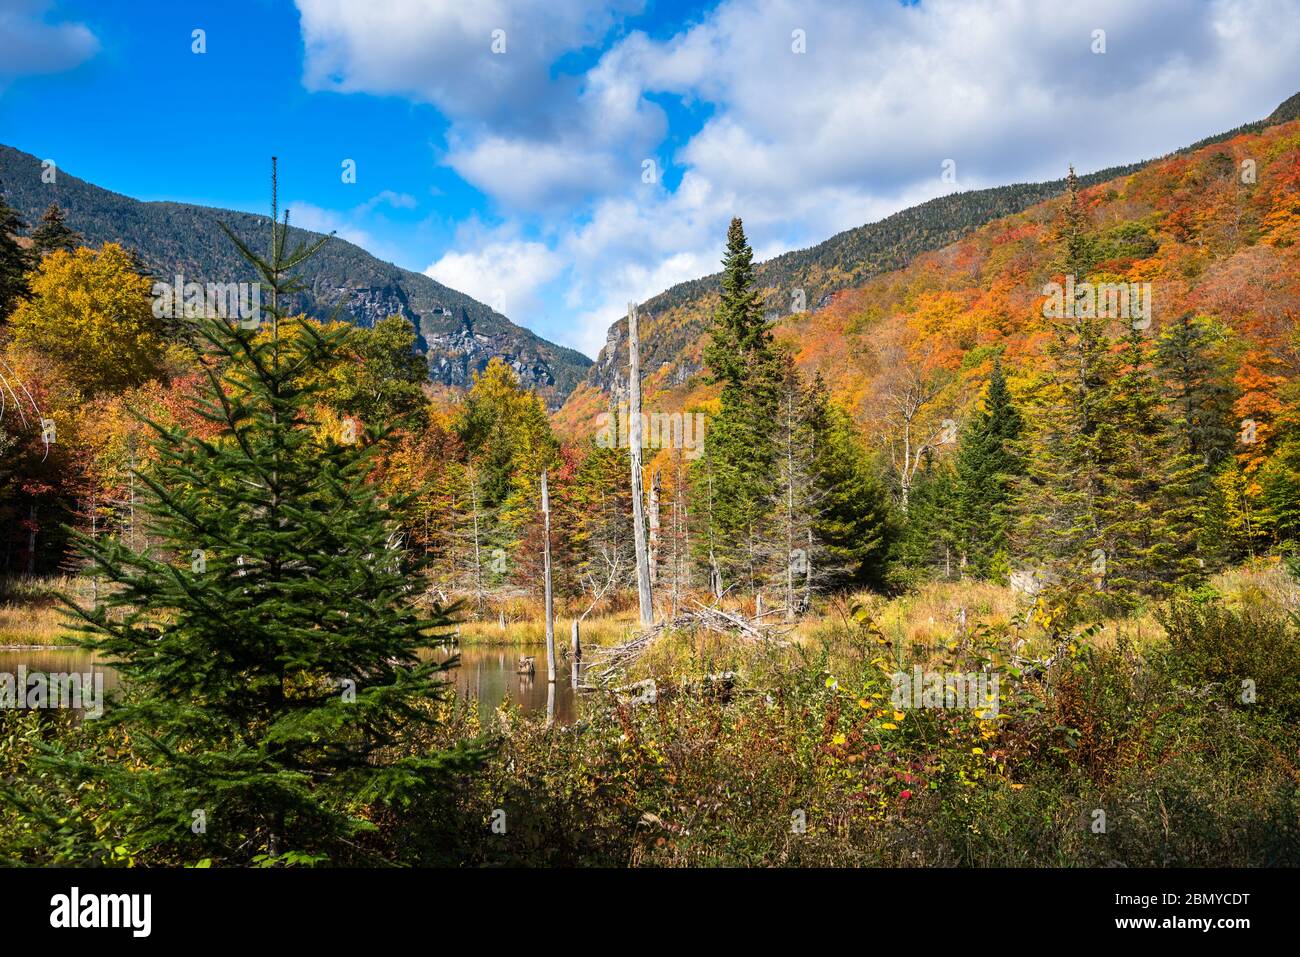 Majestic forested mountain scenery at the peak of fall foliage on a sunny day. A pond surrounded by colourful deciduous trees is in foreground. Stock Photo